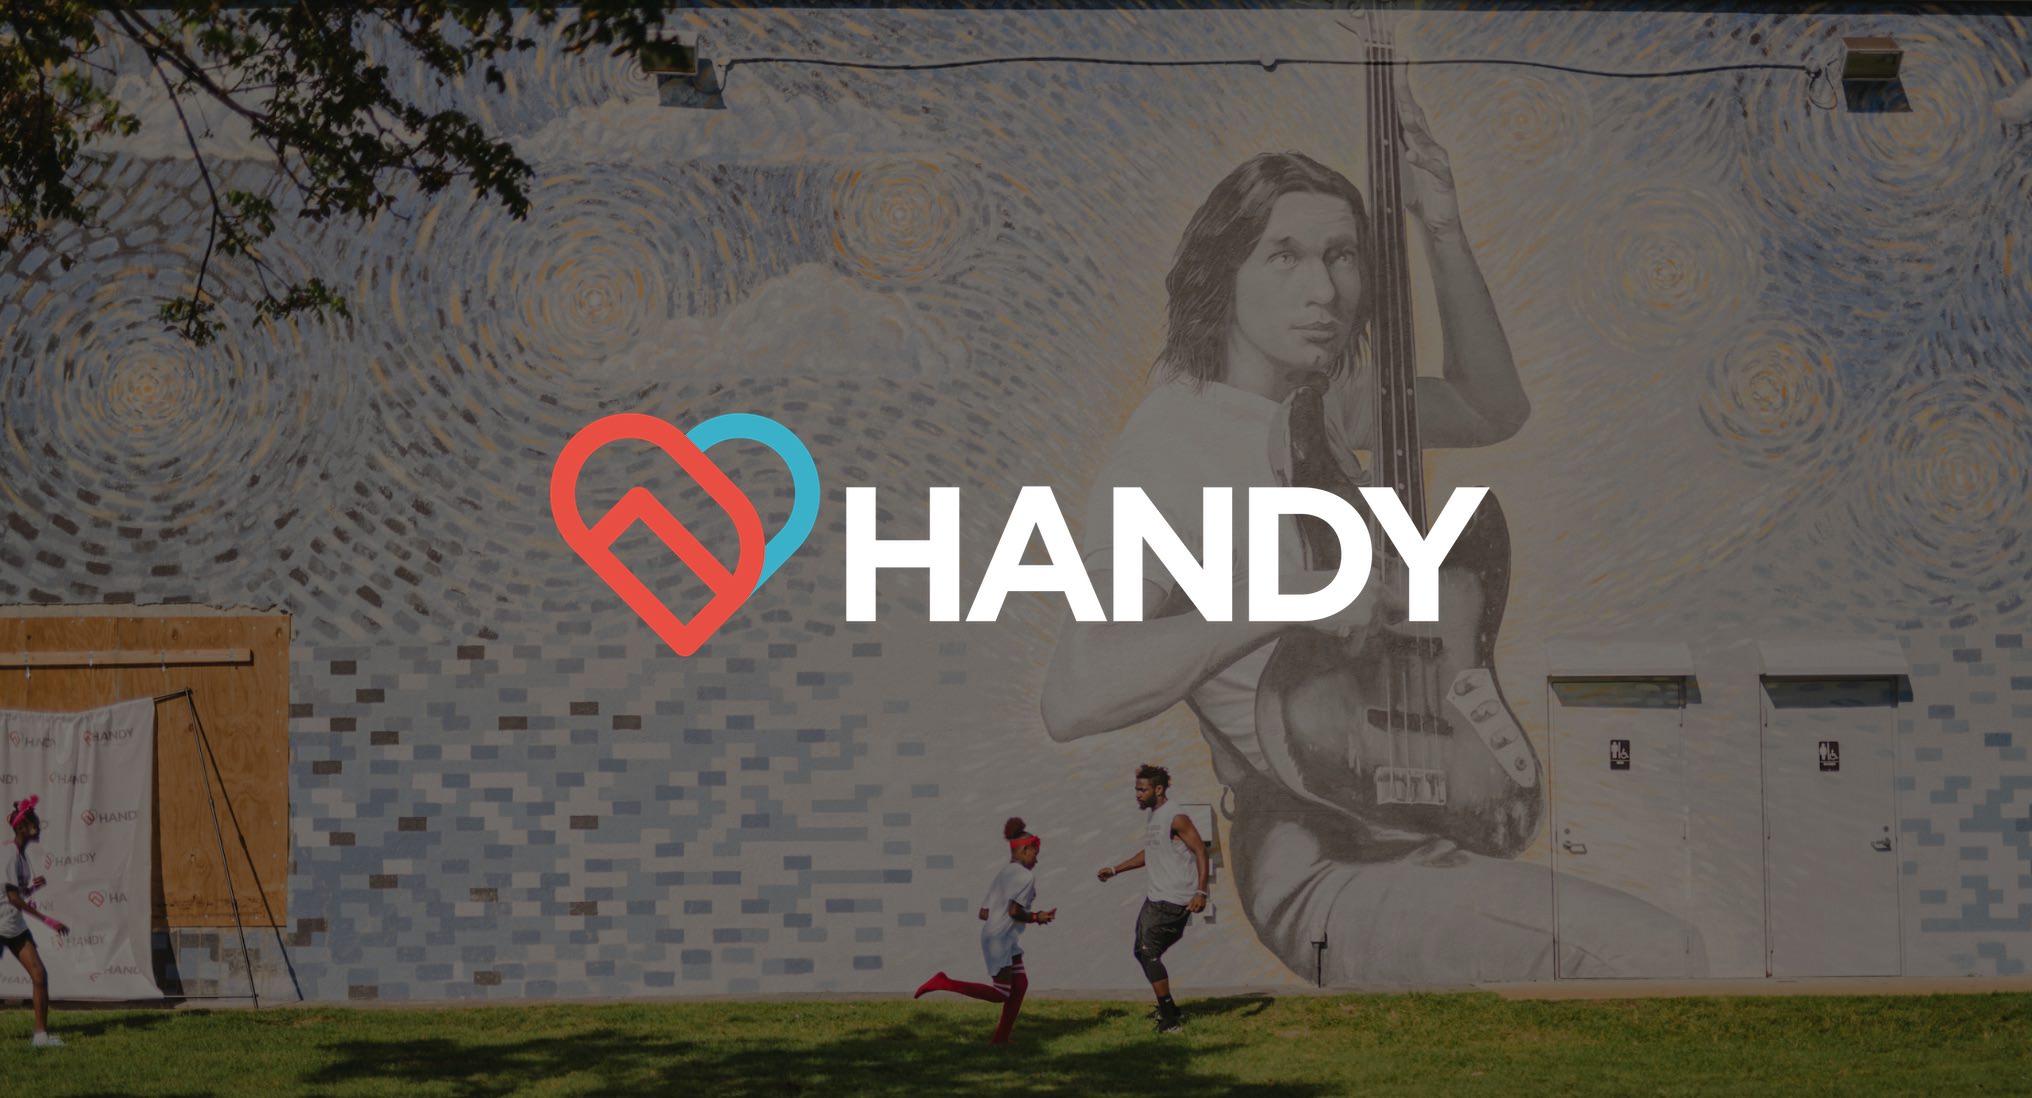 Handy logo on background of people running by a large mural on the side of a building